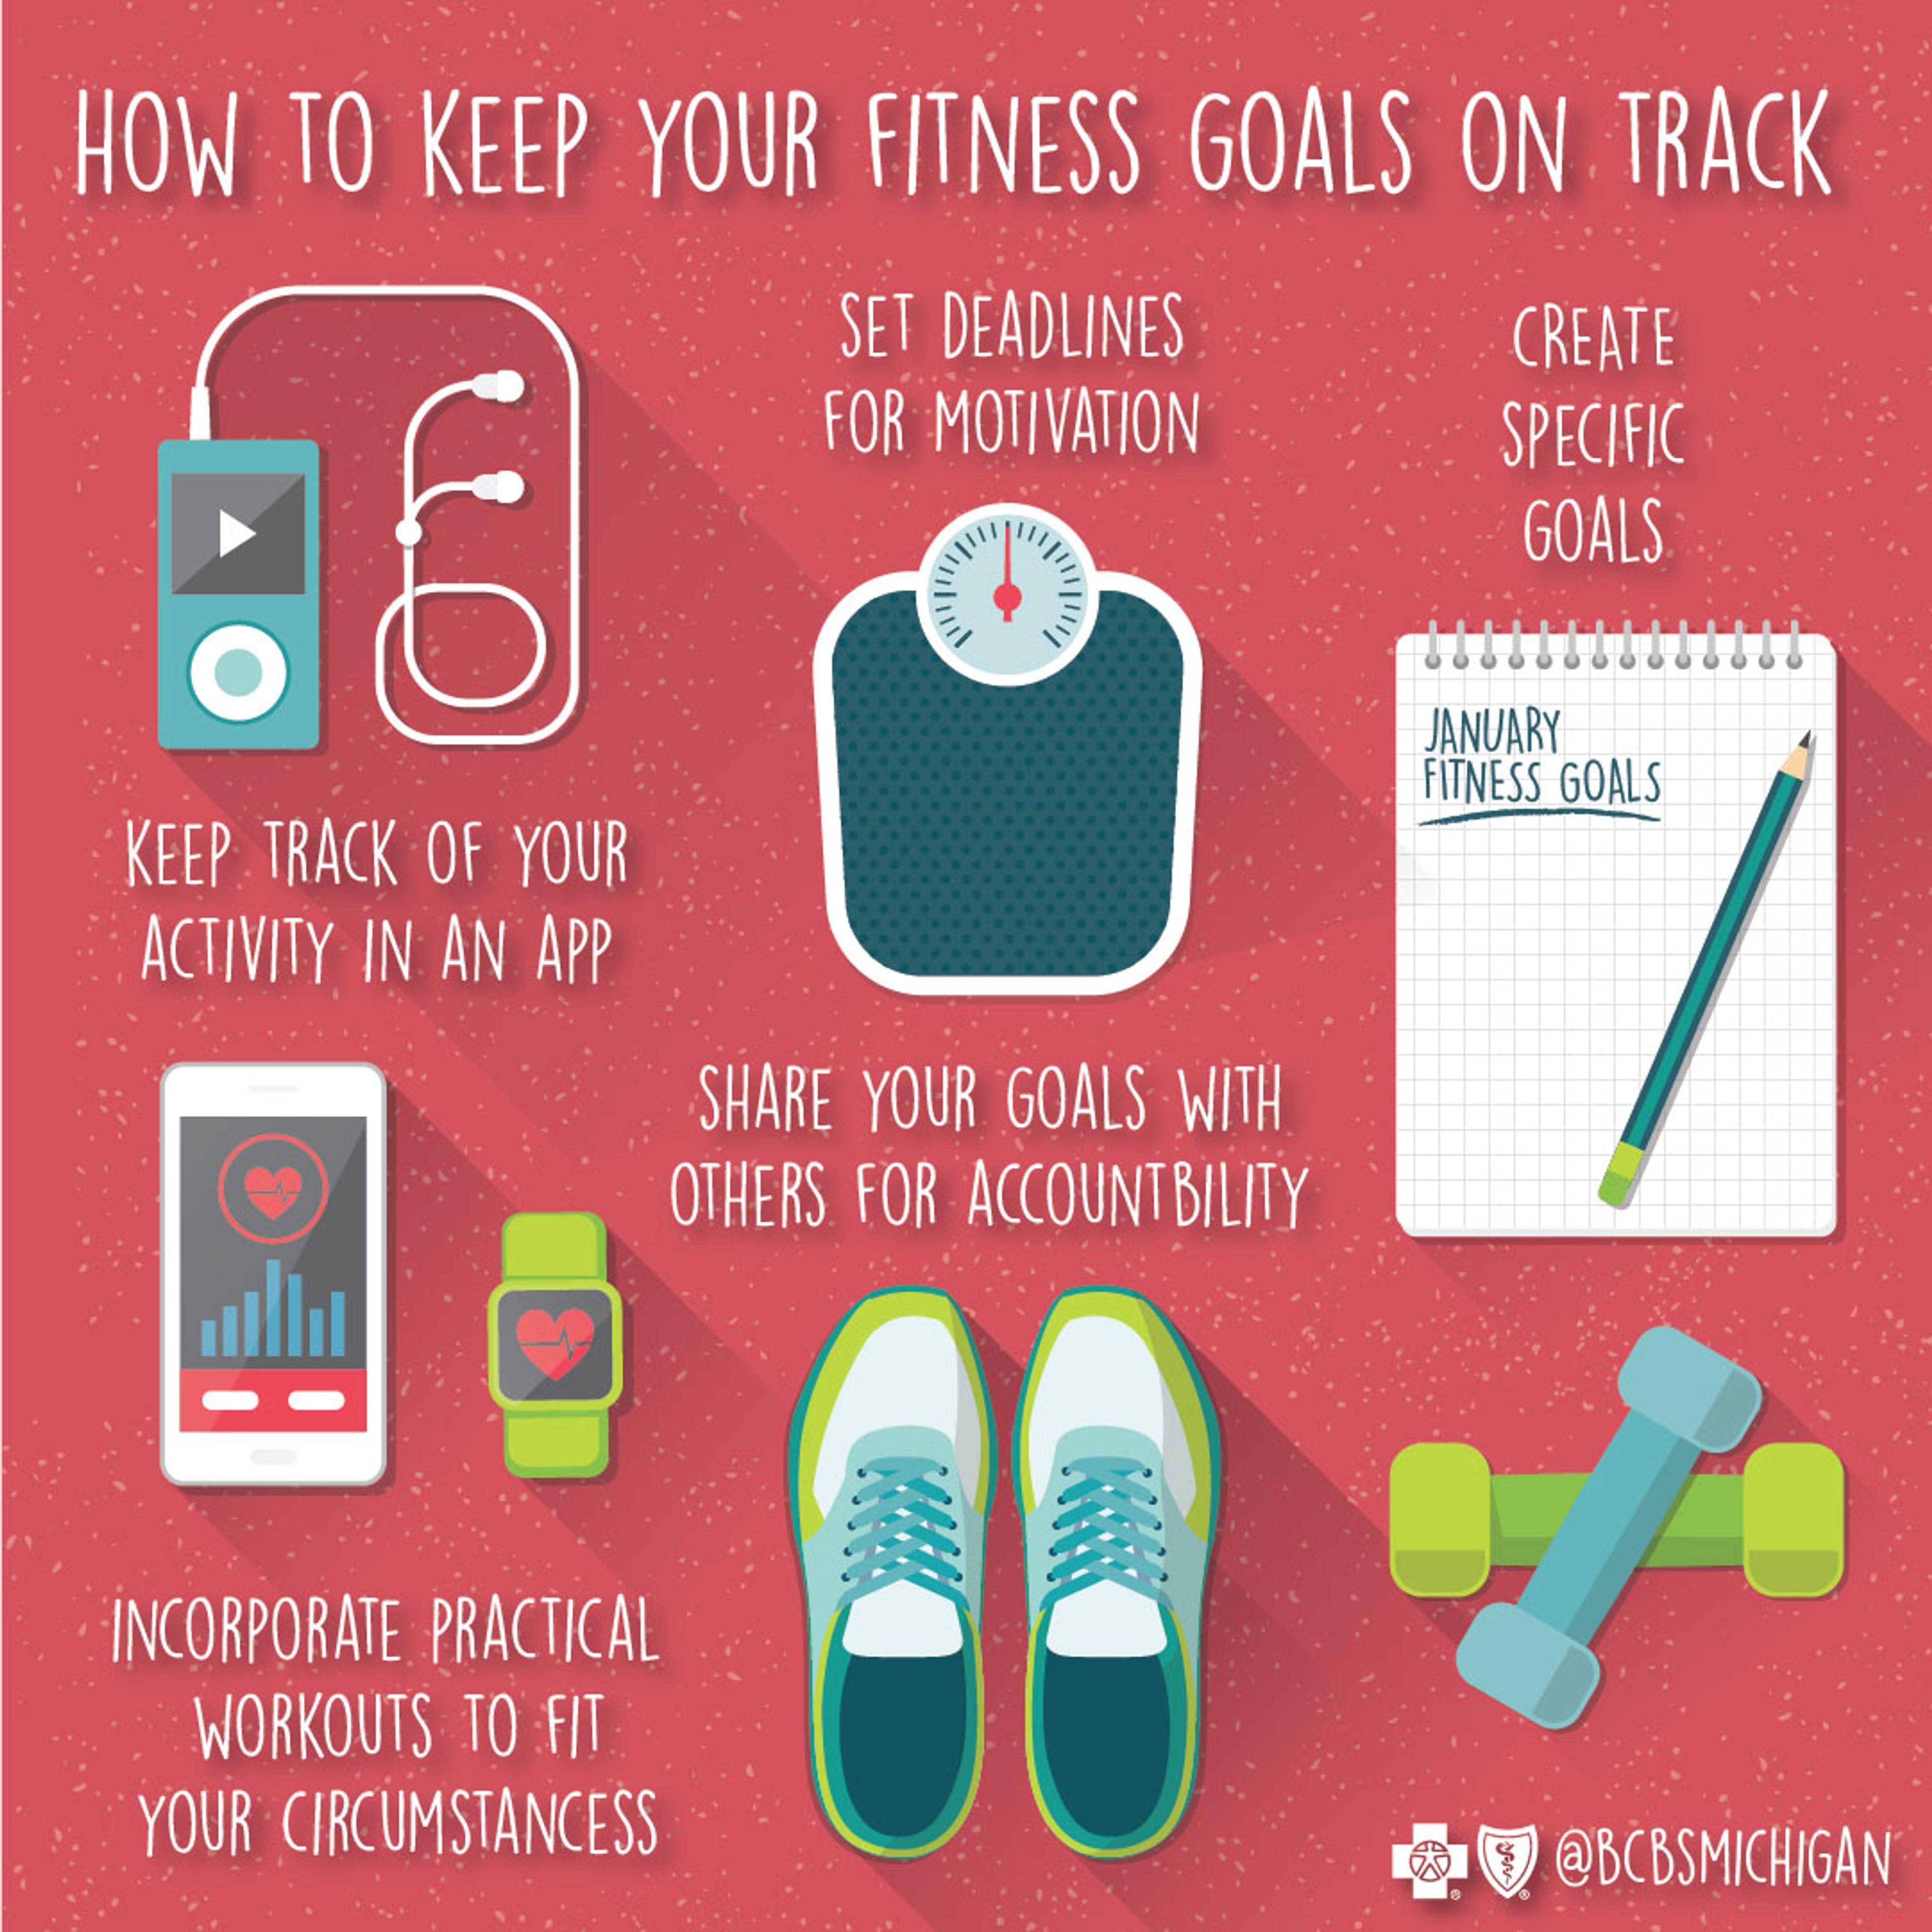 How to Plan Your Next Fitness Goal, Fitness Goals for Beginners